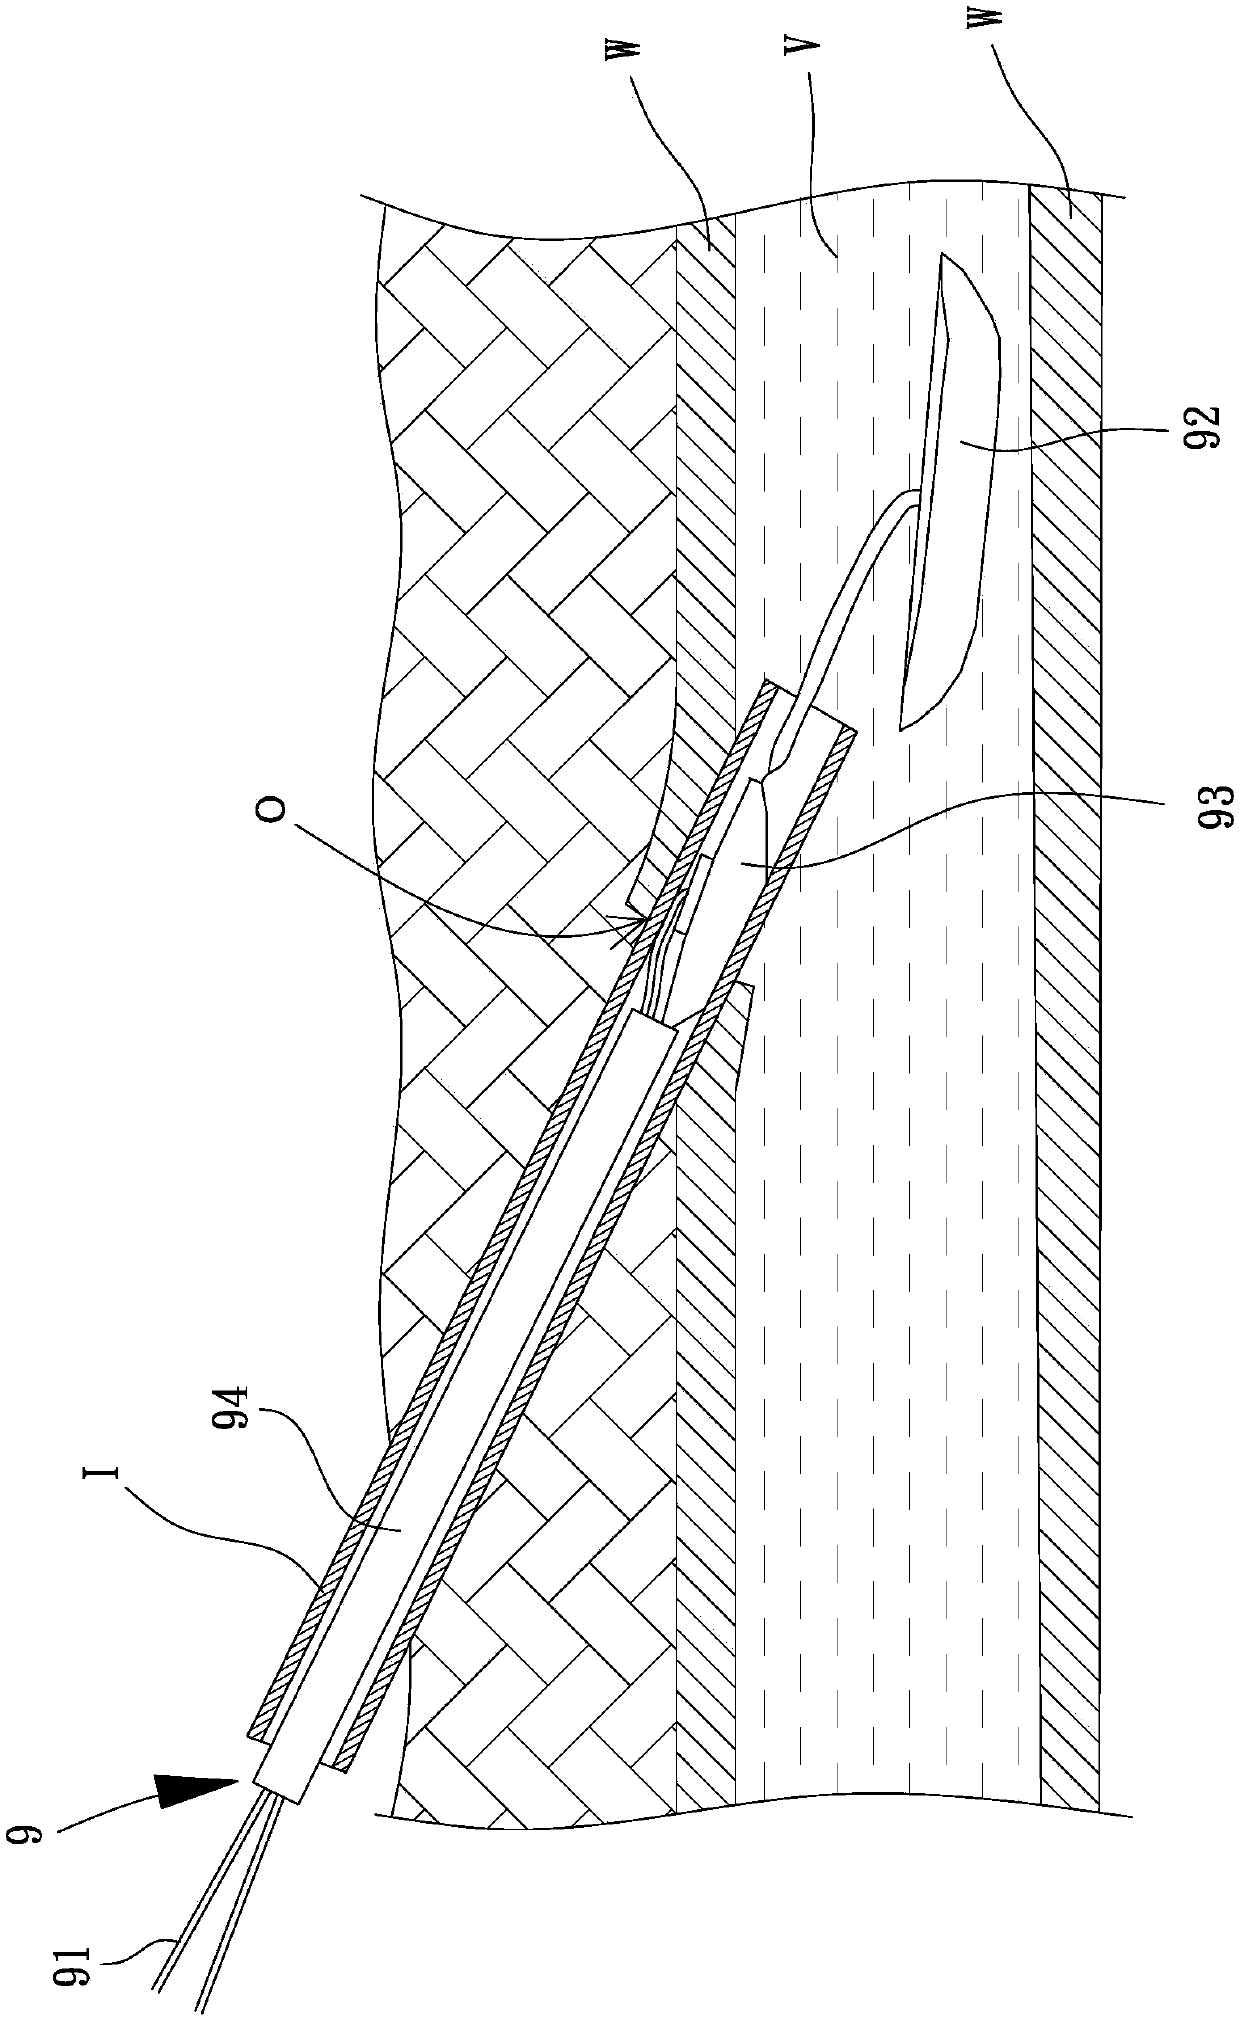 Vascular puncture sealing device